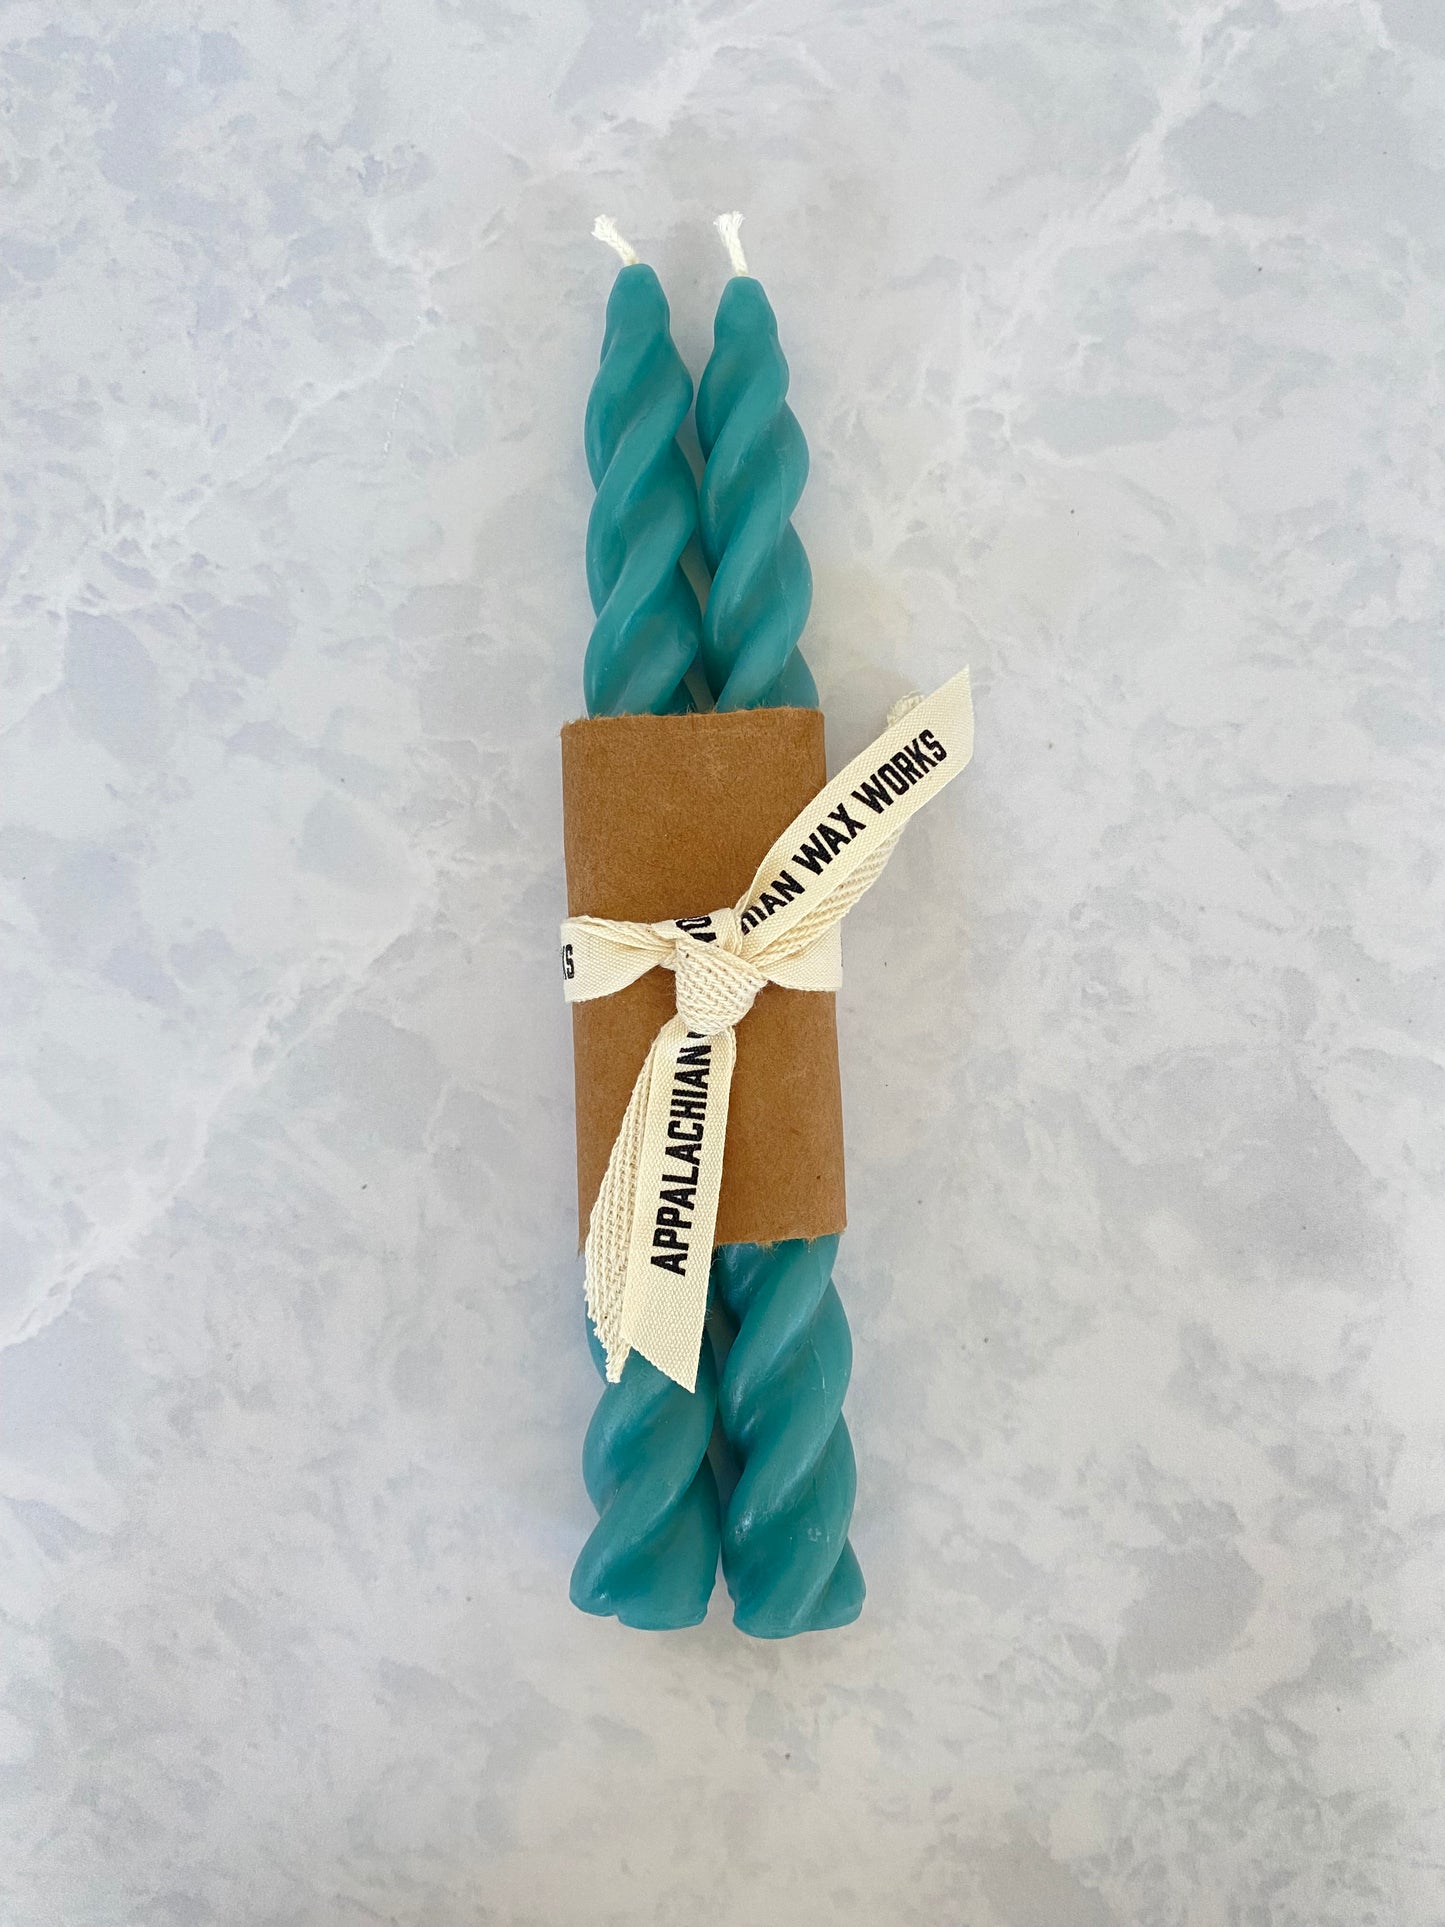 Beeswax Spiral Taper Candle in Teal Blue Color for Sale